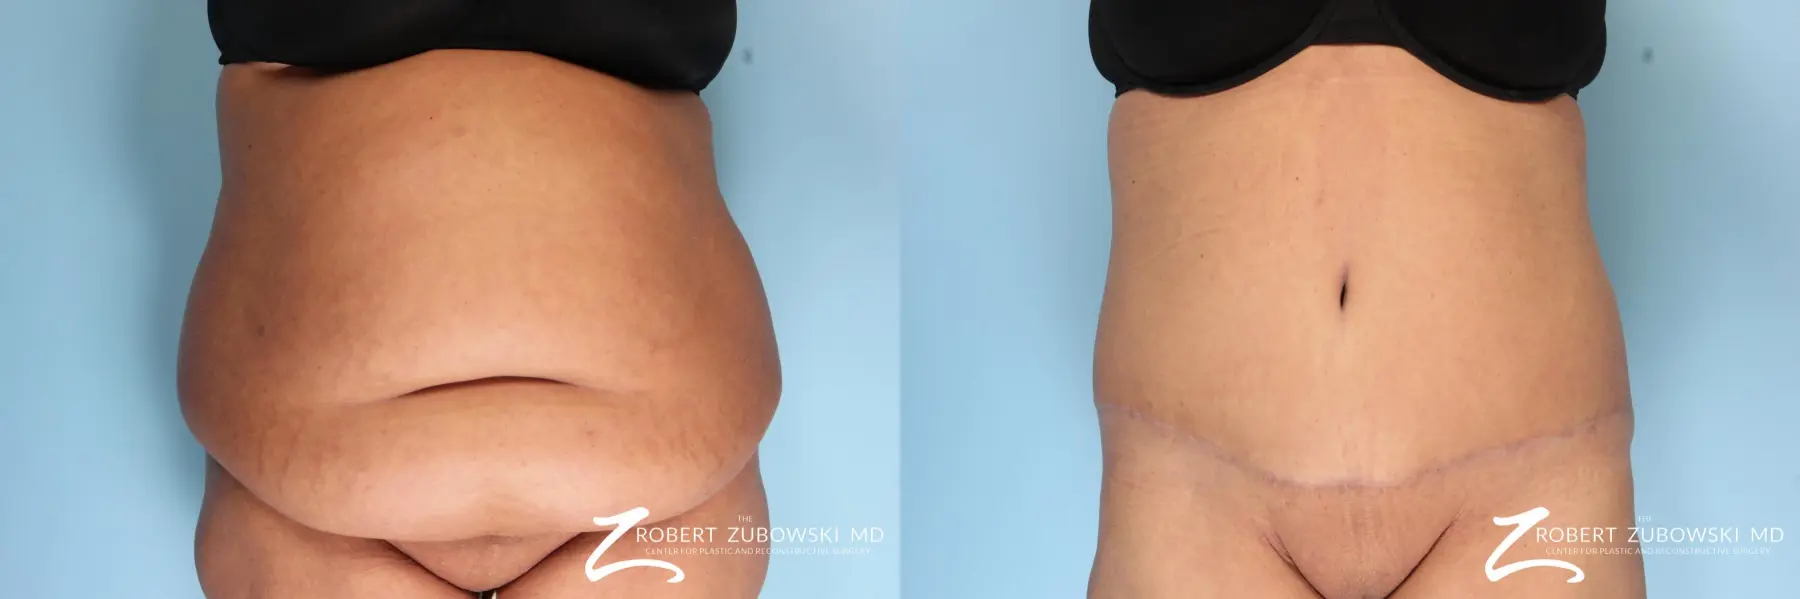 Tummy Tuck: Patient 19 - Before and After 1